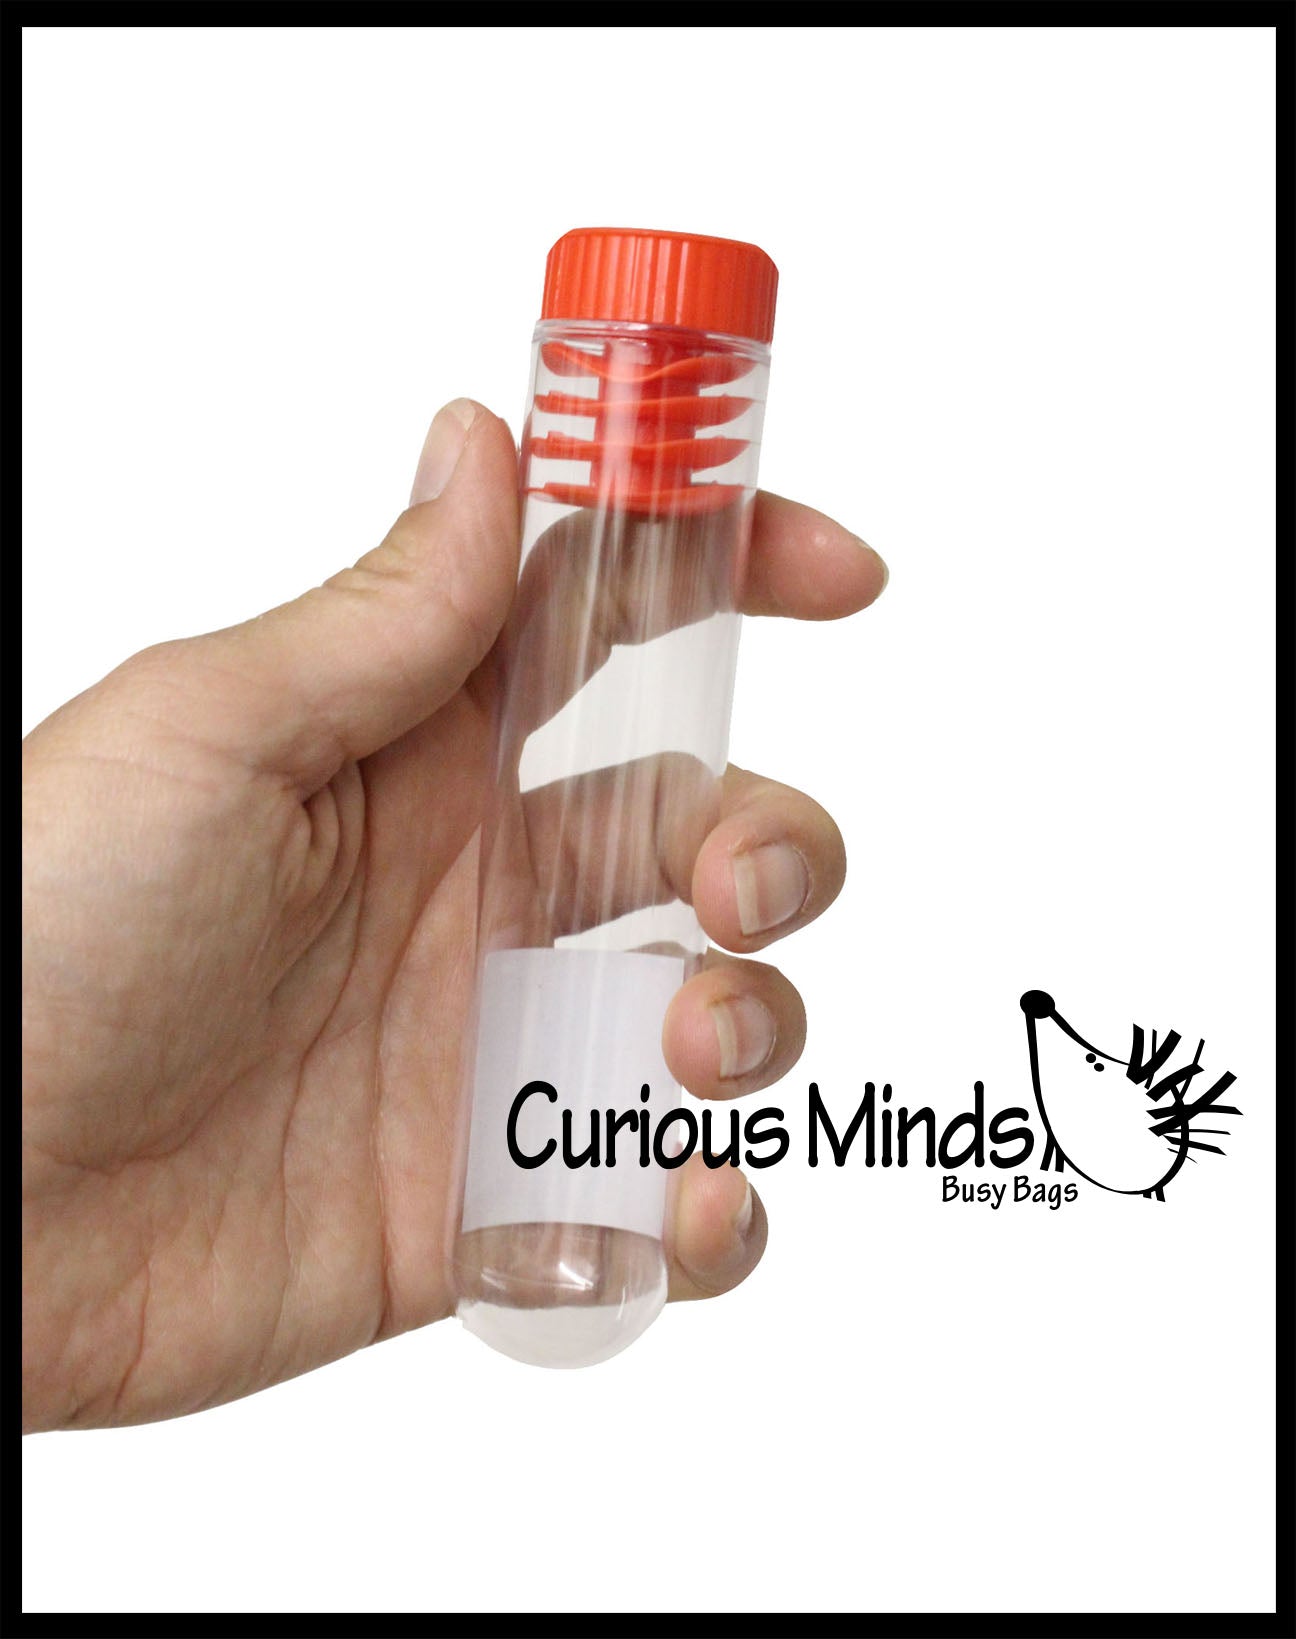 CLEARANCE - SALE - Test Tube - Fun for Bath and Experiments